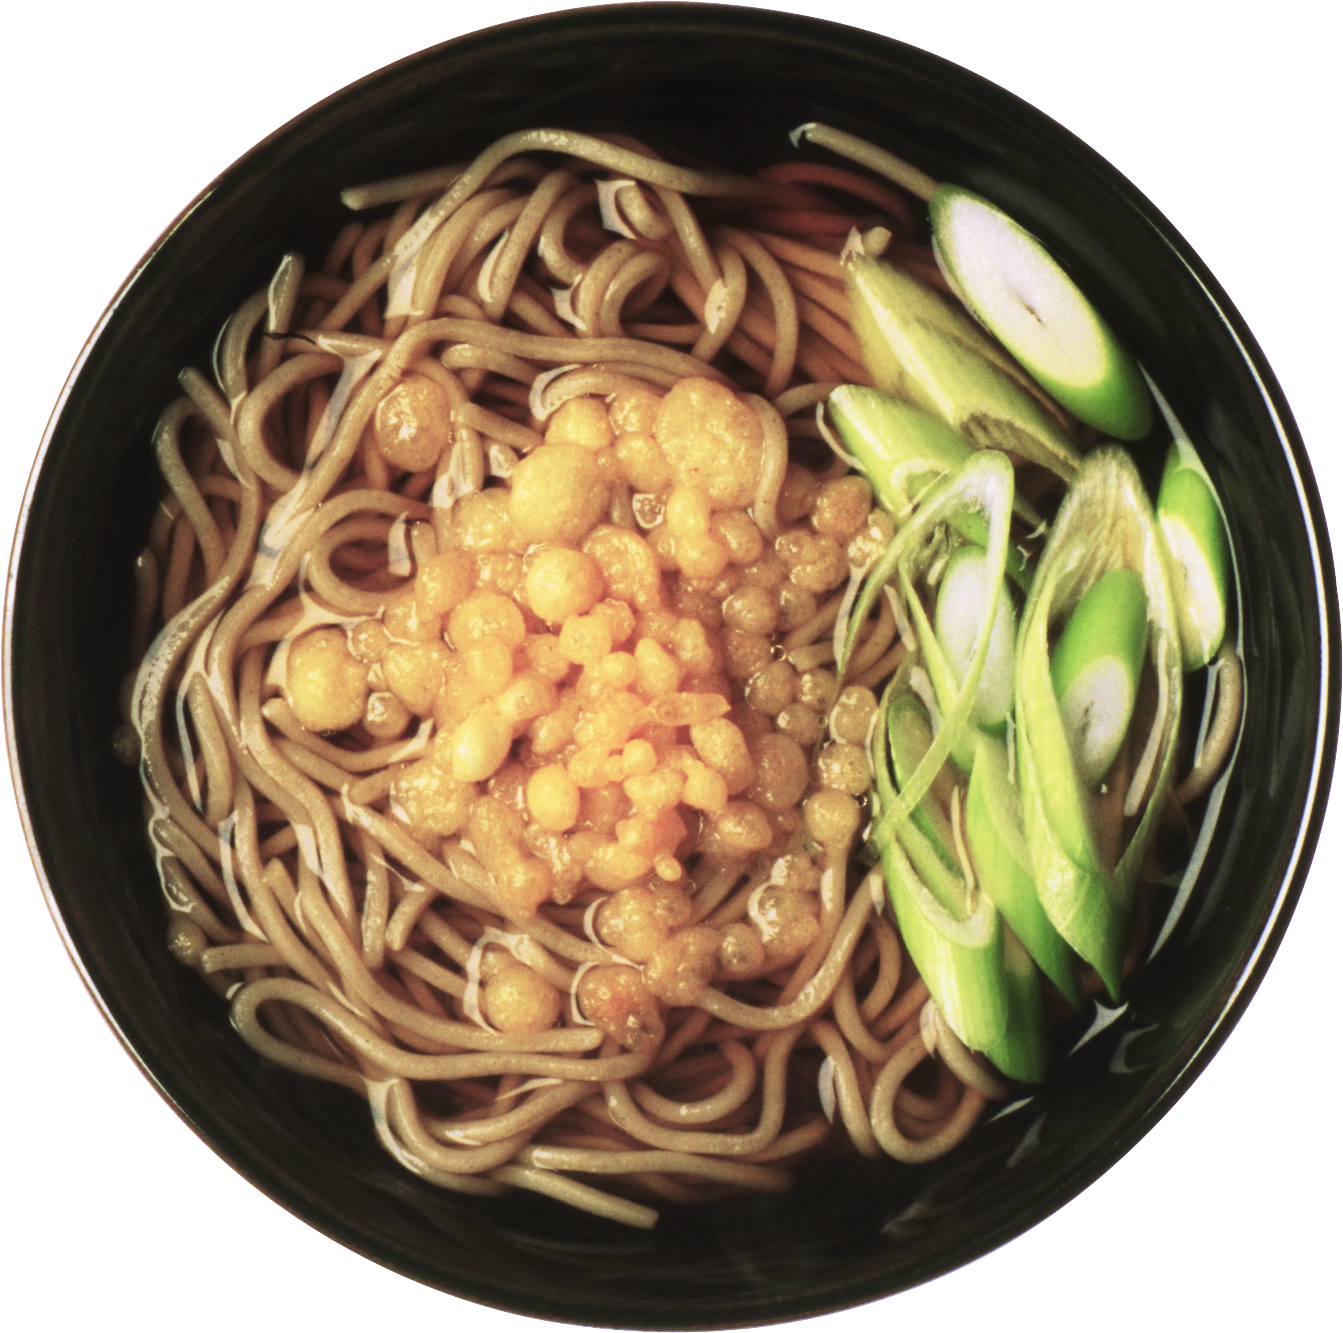 A Bowl Of Noodles And Vegetables